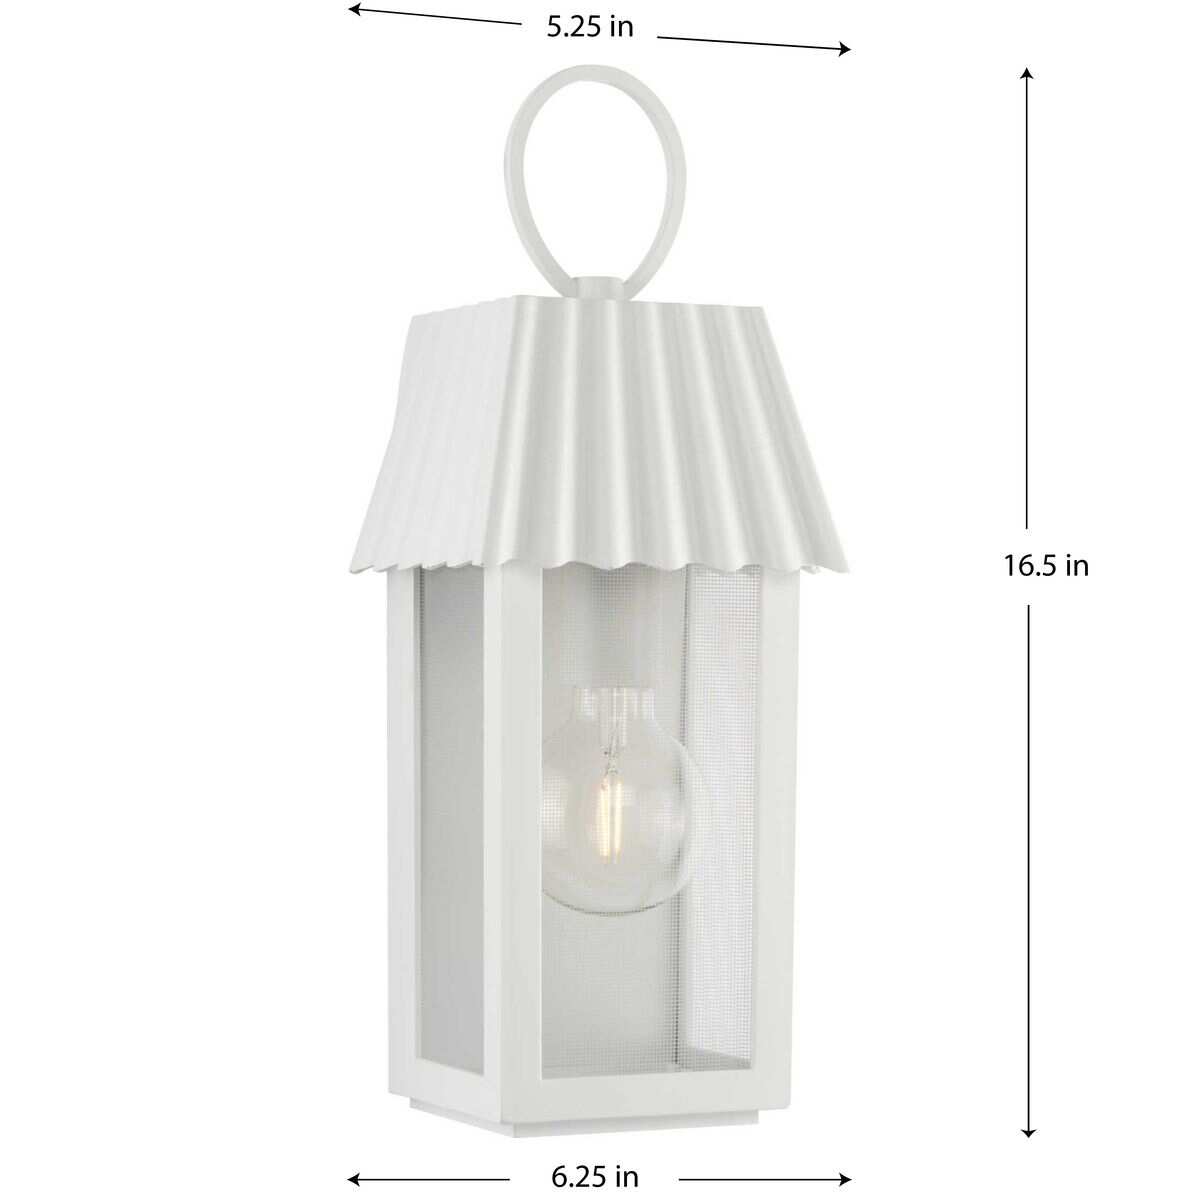 Jeffrey Alan Marks Point Dume Hook Pond Shelter White Outdoor Wall Lantern with DURASHIELD - 6.25 in x 5.25 in x 16.5 in